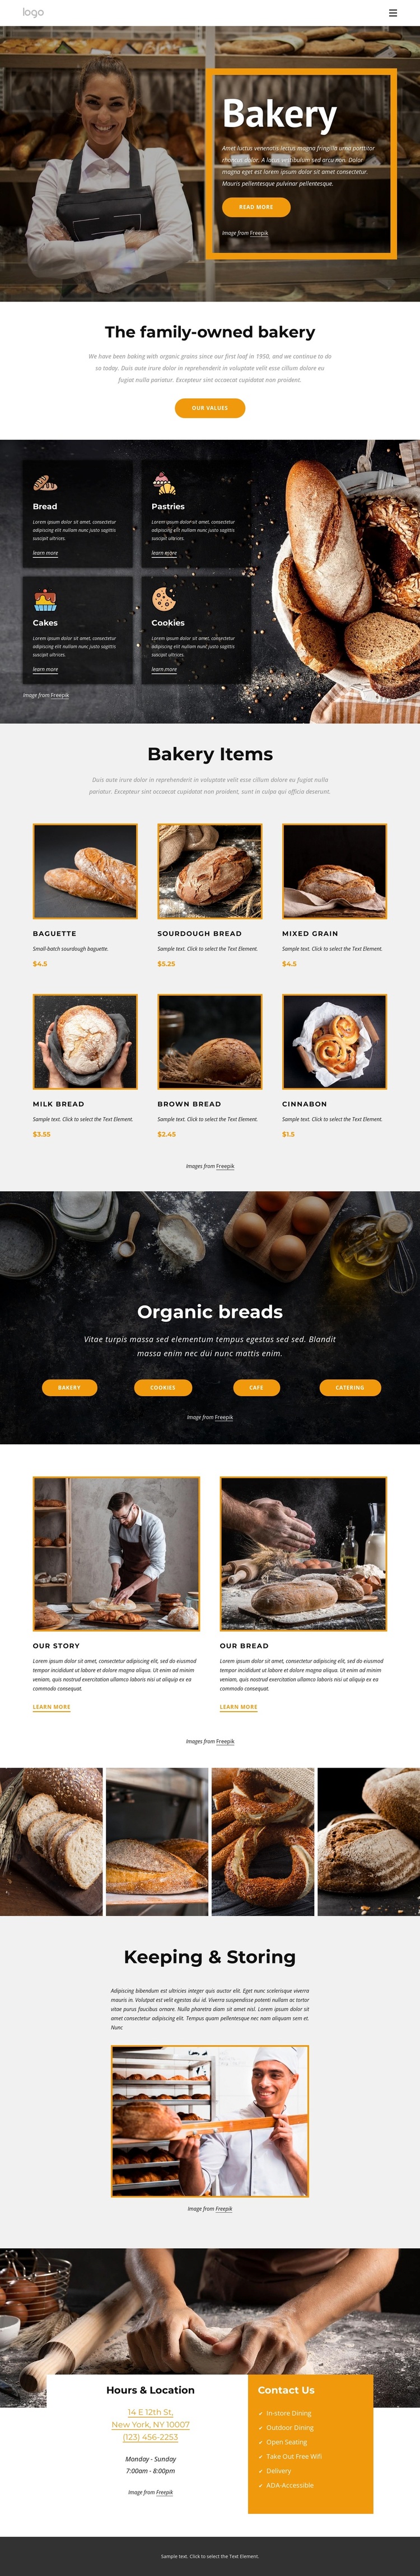 The family-owned bakery Joomla Page Builder